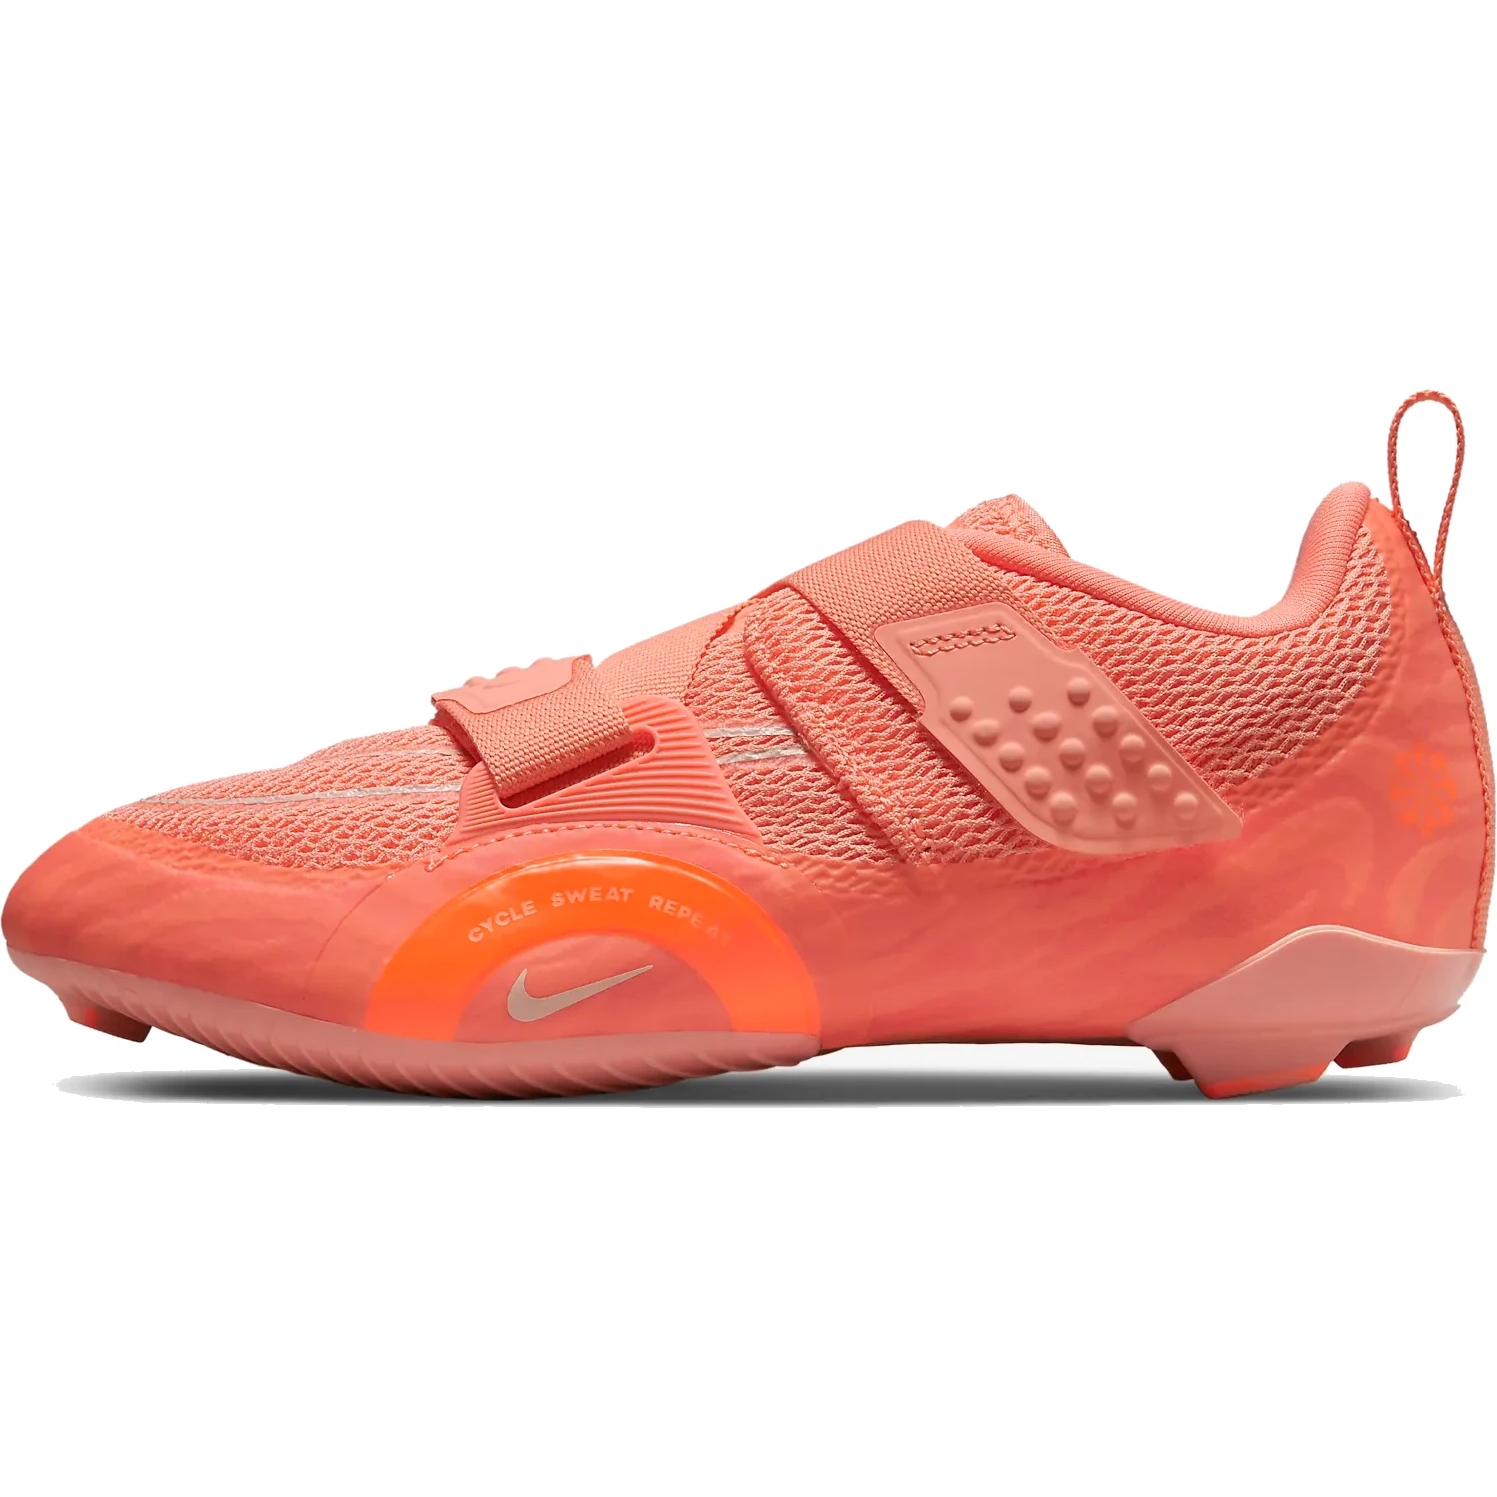 Immagine di Nike Indoor-Cycling-Scarpe Donna - SuperRep Cycle 2 Next Nature - crimson bliss/pearl white-total orange DH3395-600